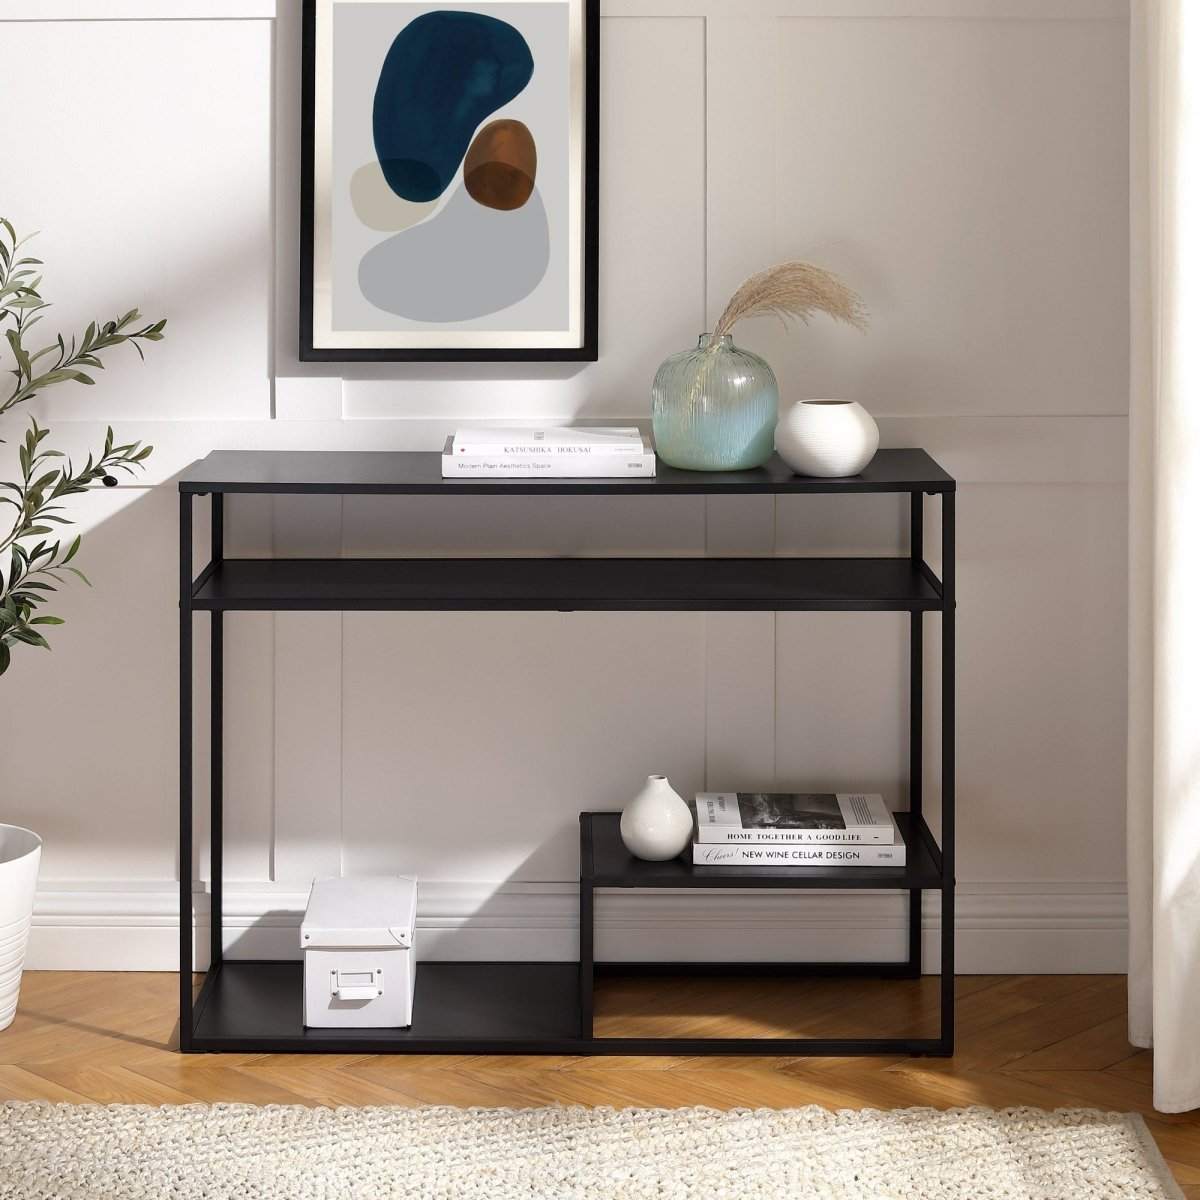 Walker Edison Fasi 42" Metal and Wood Entry Table with Tiered Shelves - lily & onyx